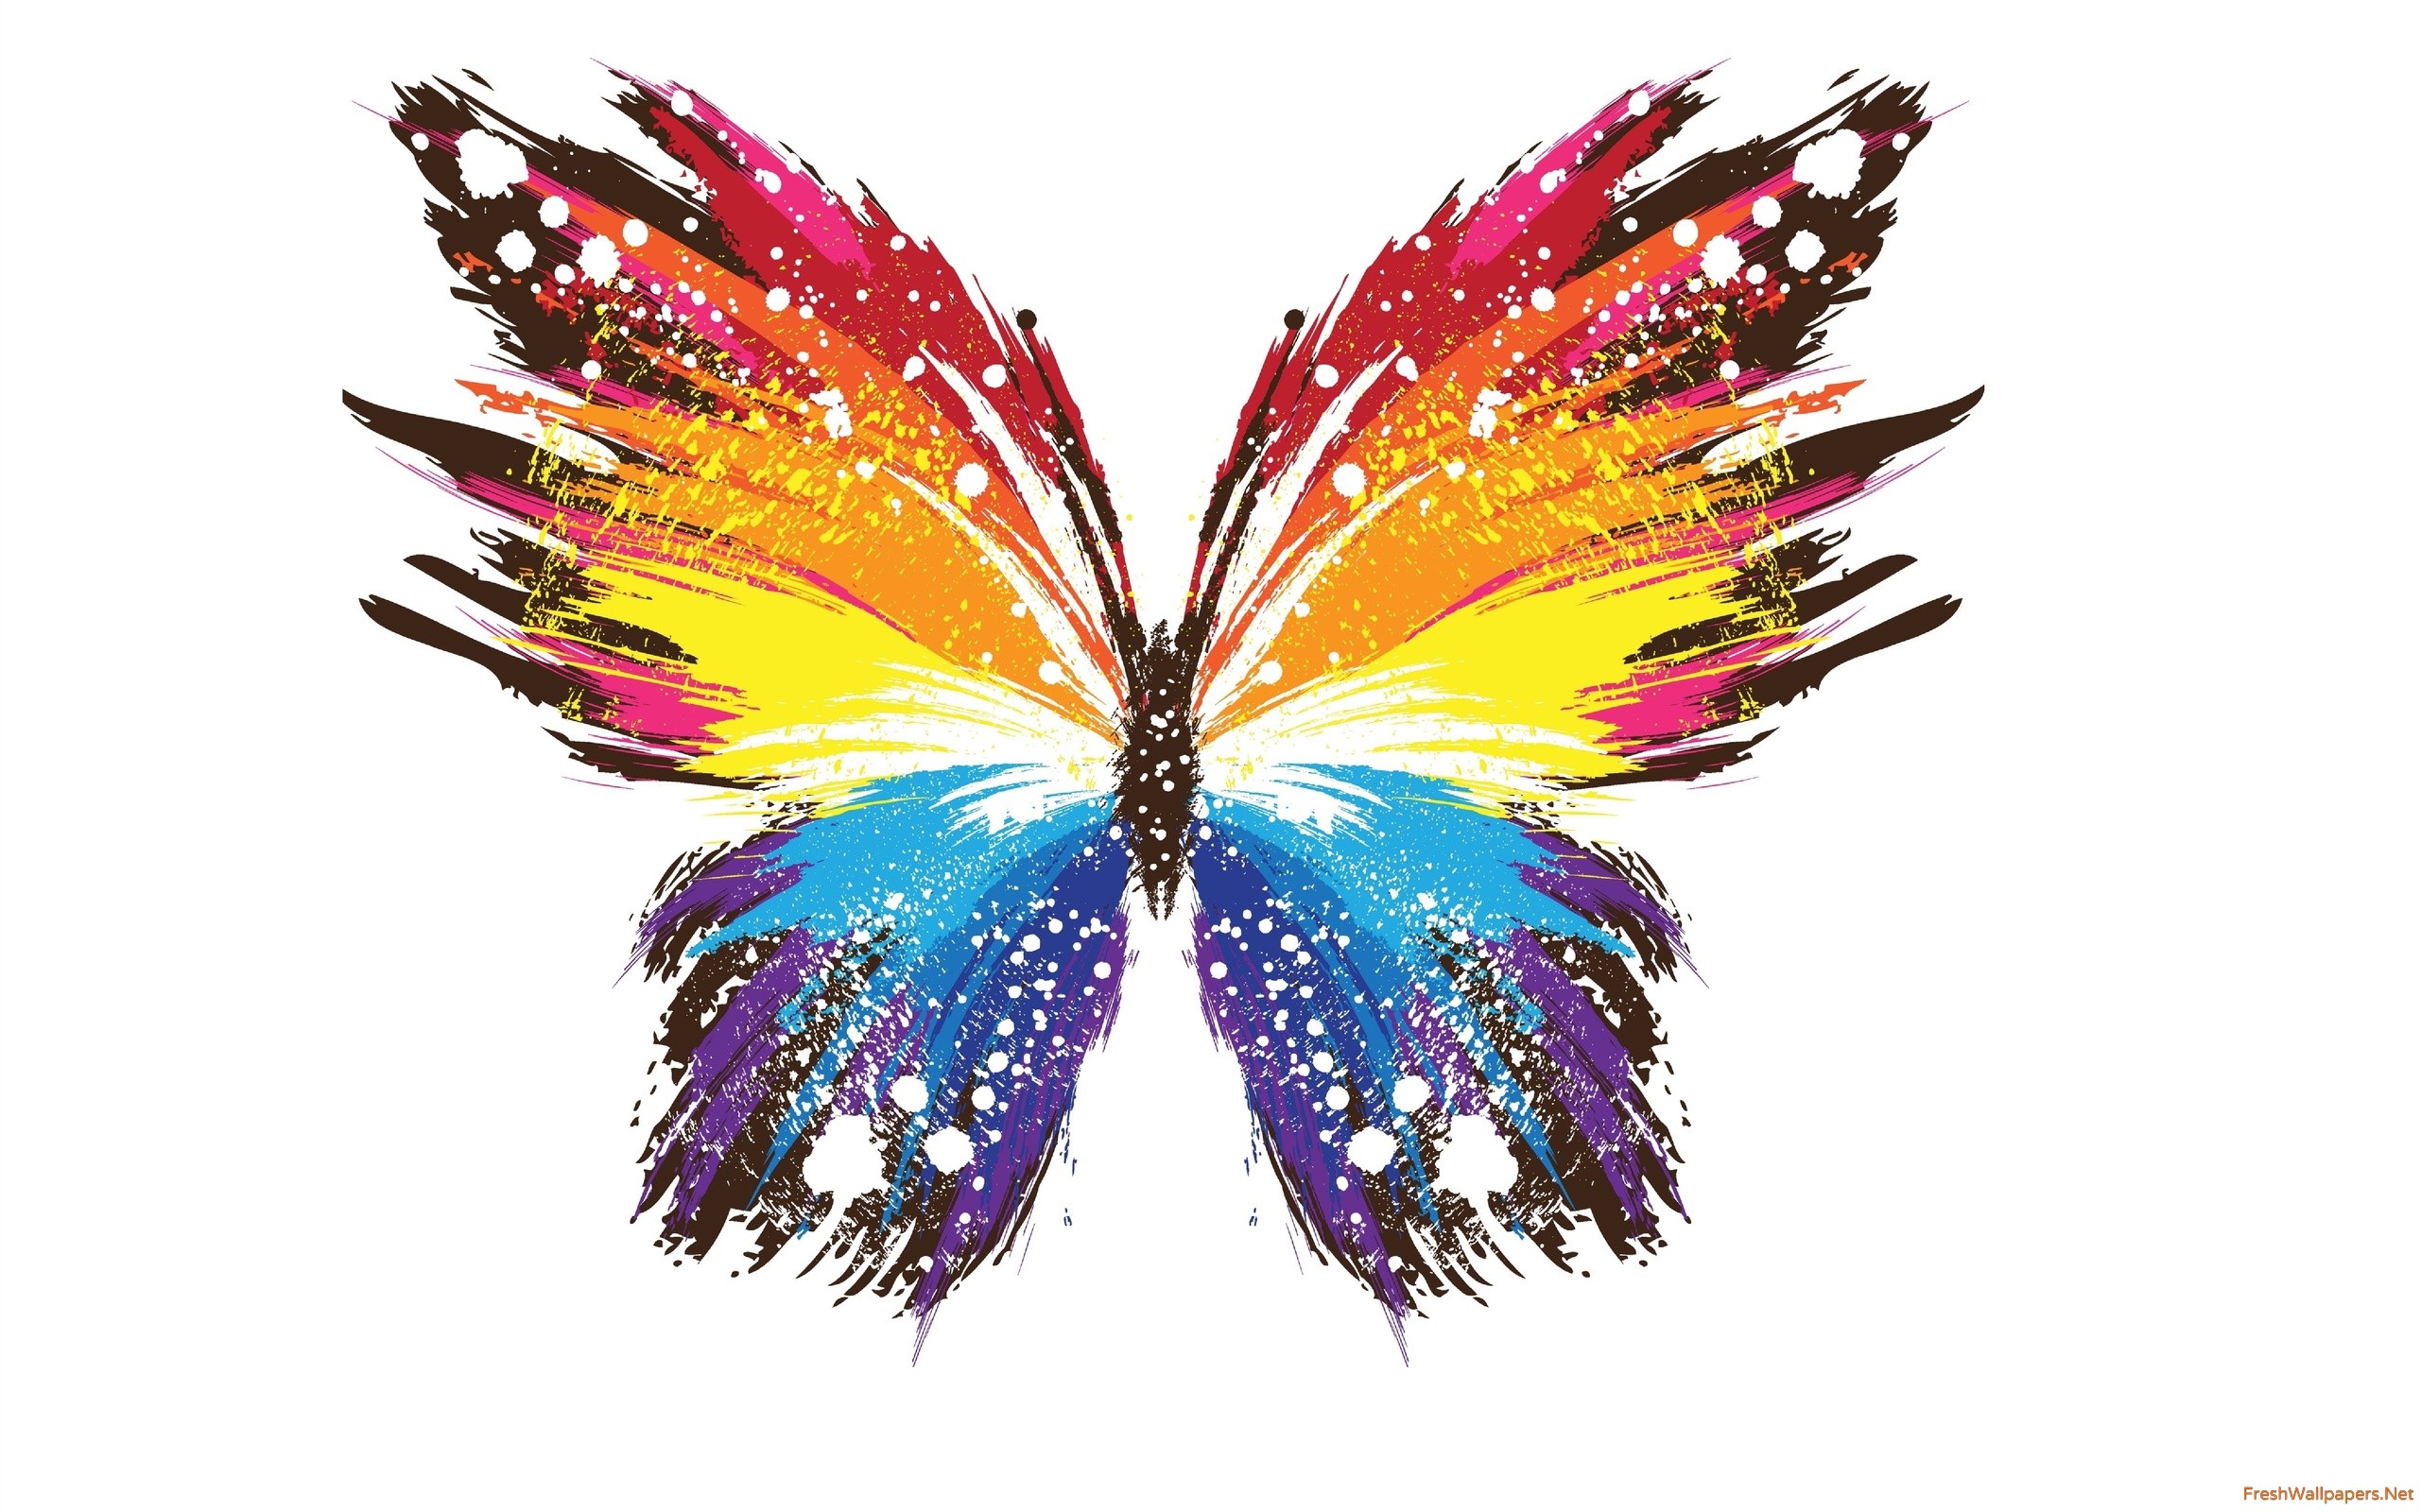 Colorful Butterfly Painting wallpapers | Freshwallpapers